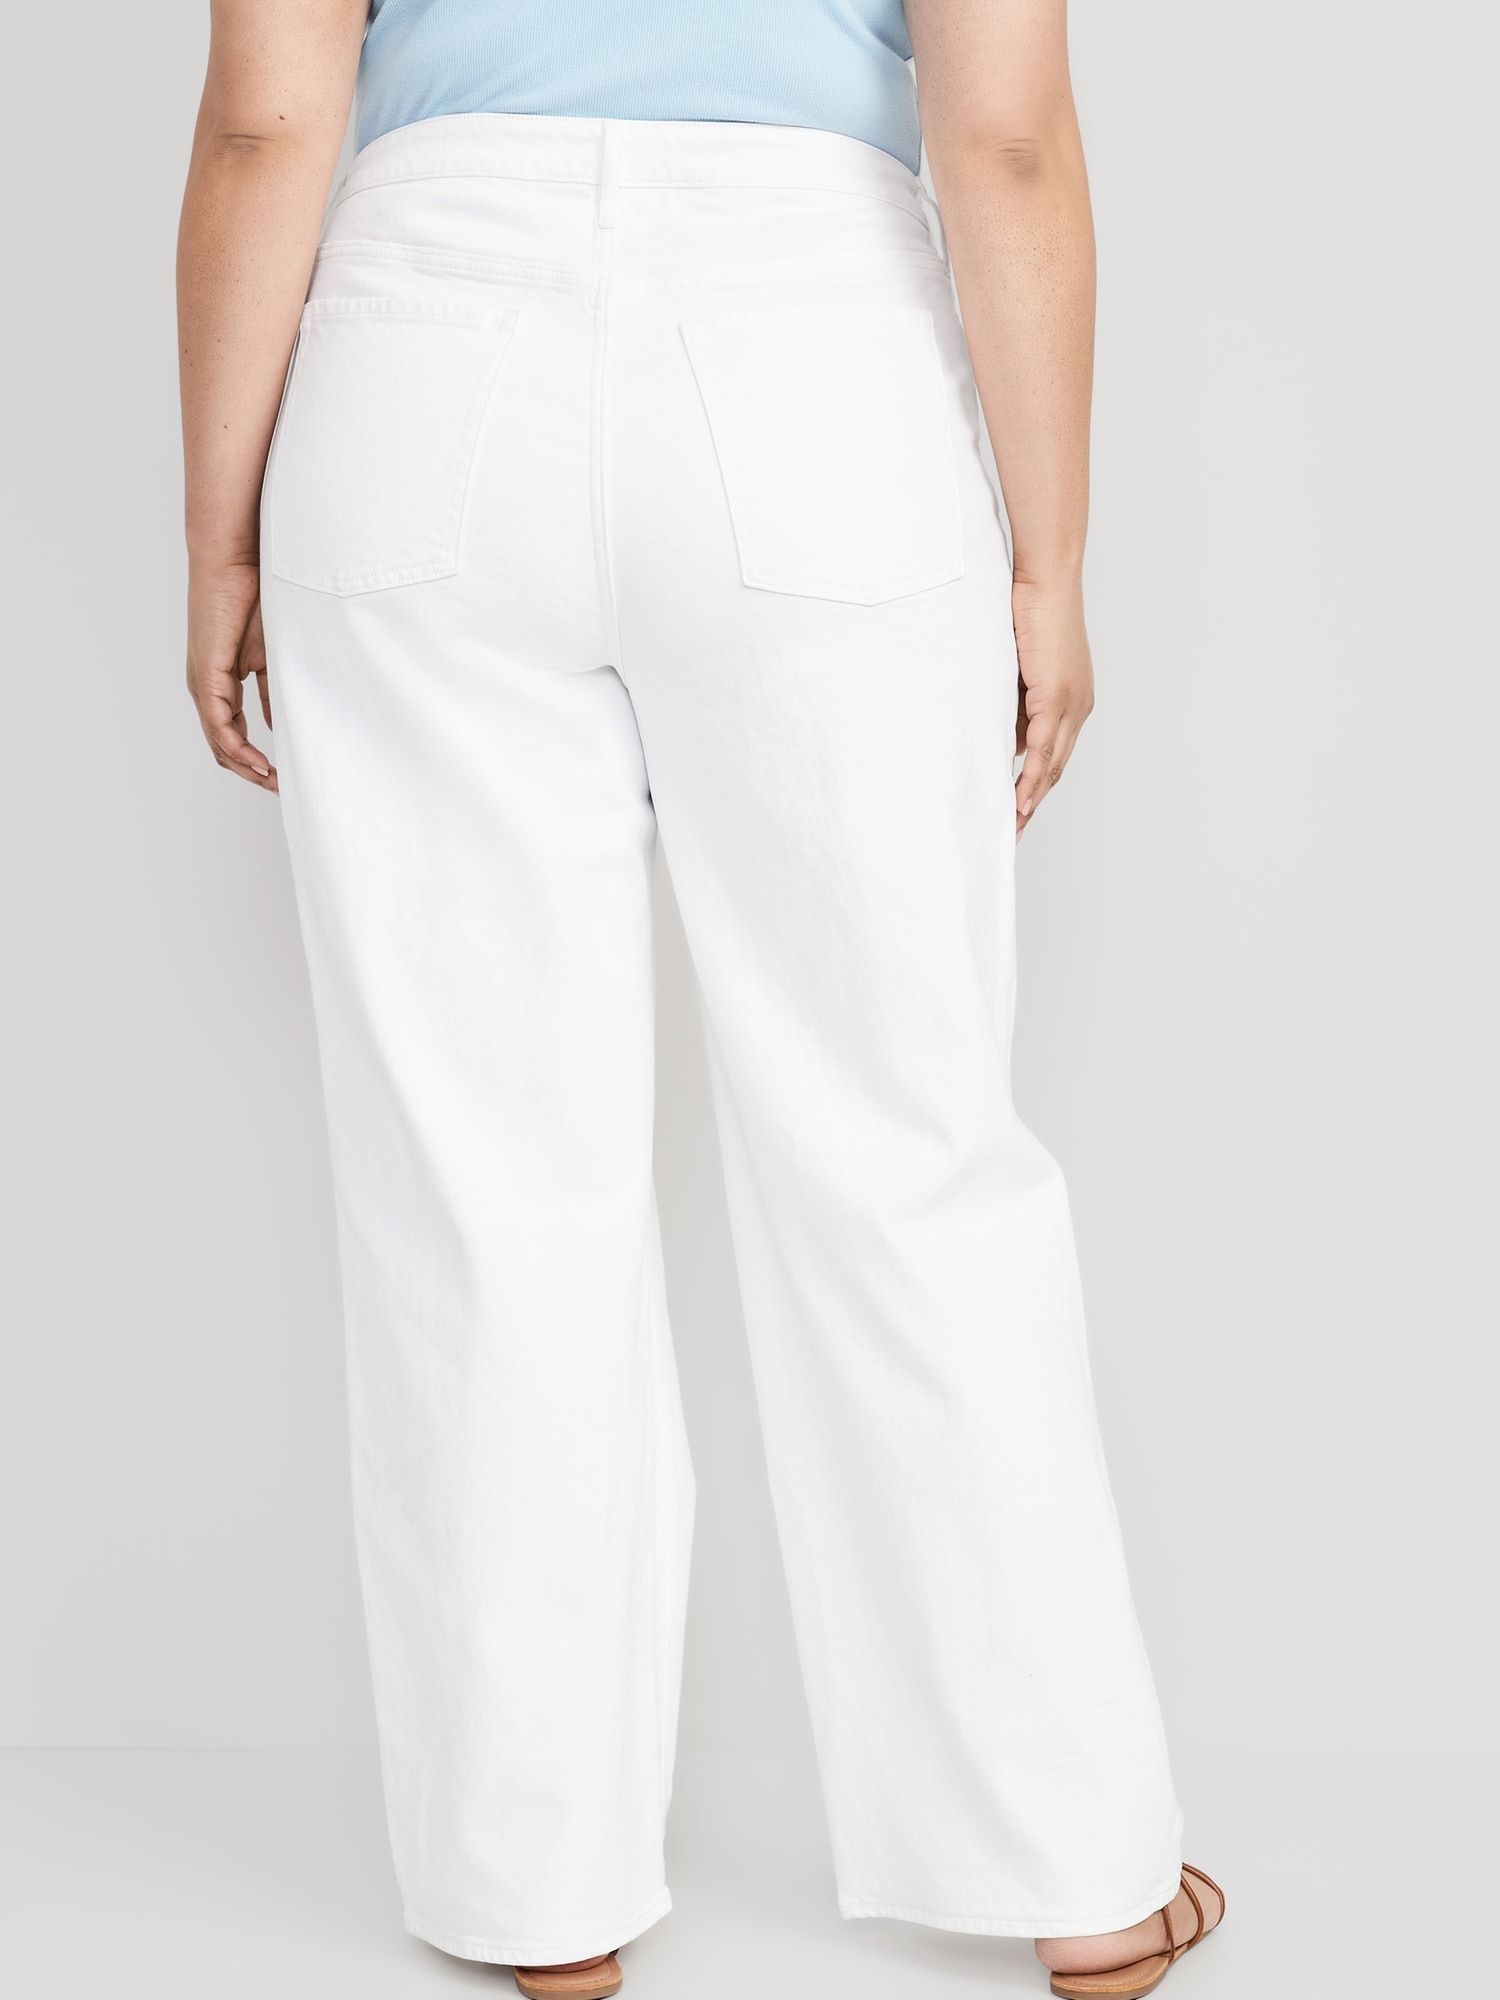 Extra High-Waisted Wide Leg Cut-Off White Jeans for Women Navy